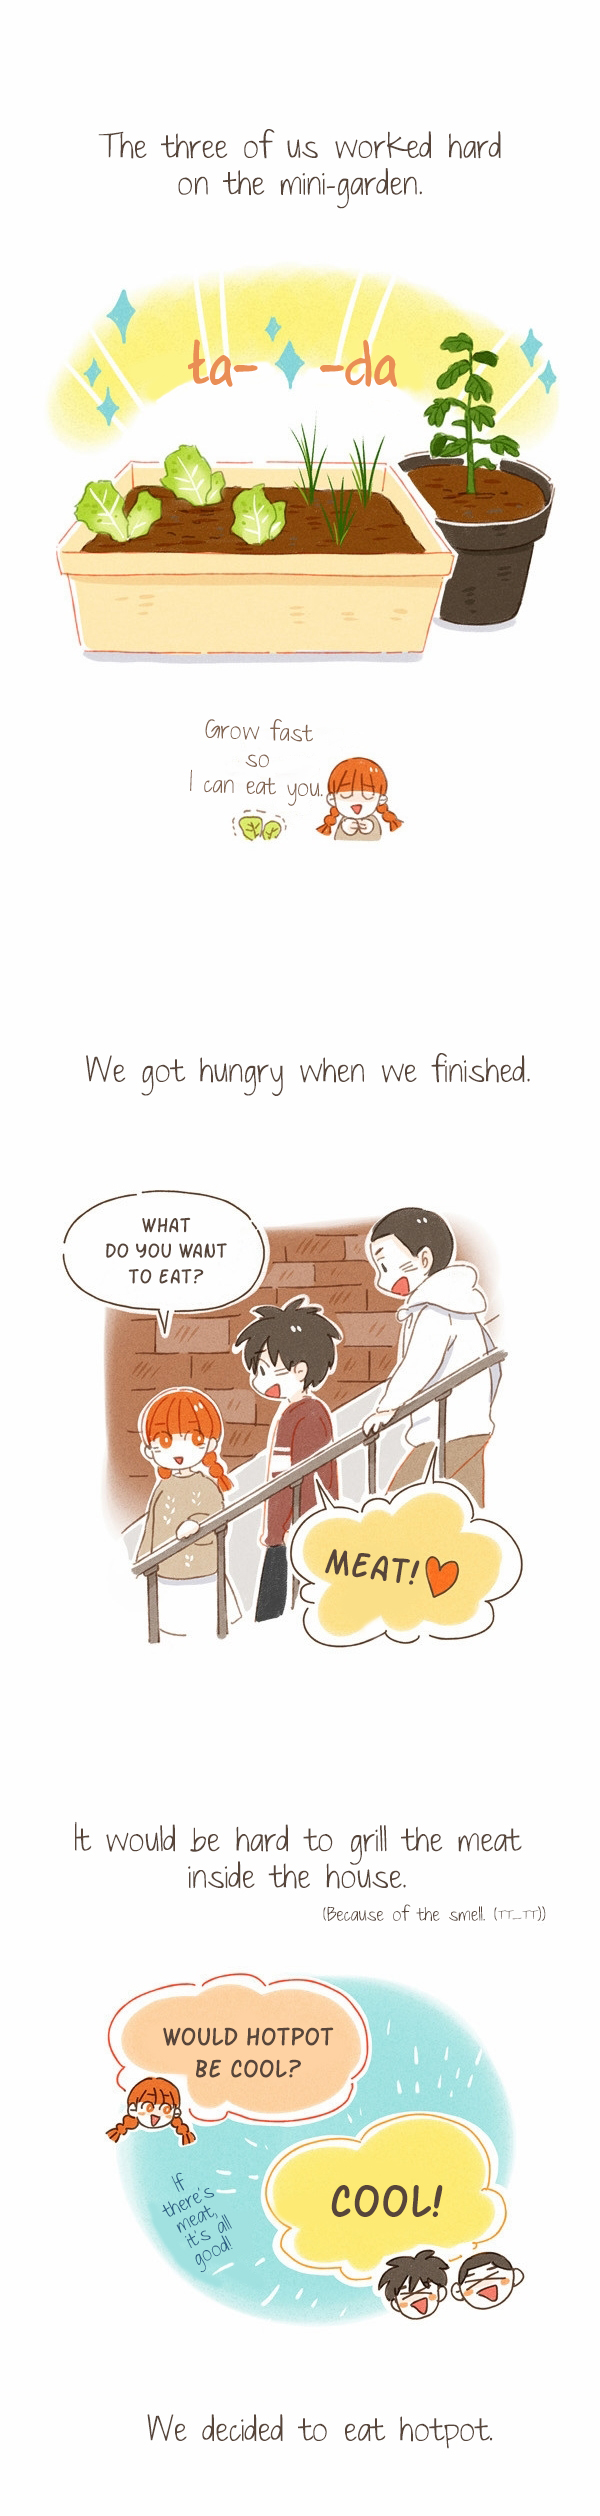 Are You Going to Eat? Ch. 4 Hotpot